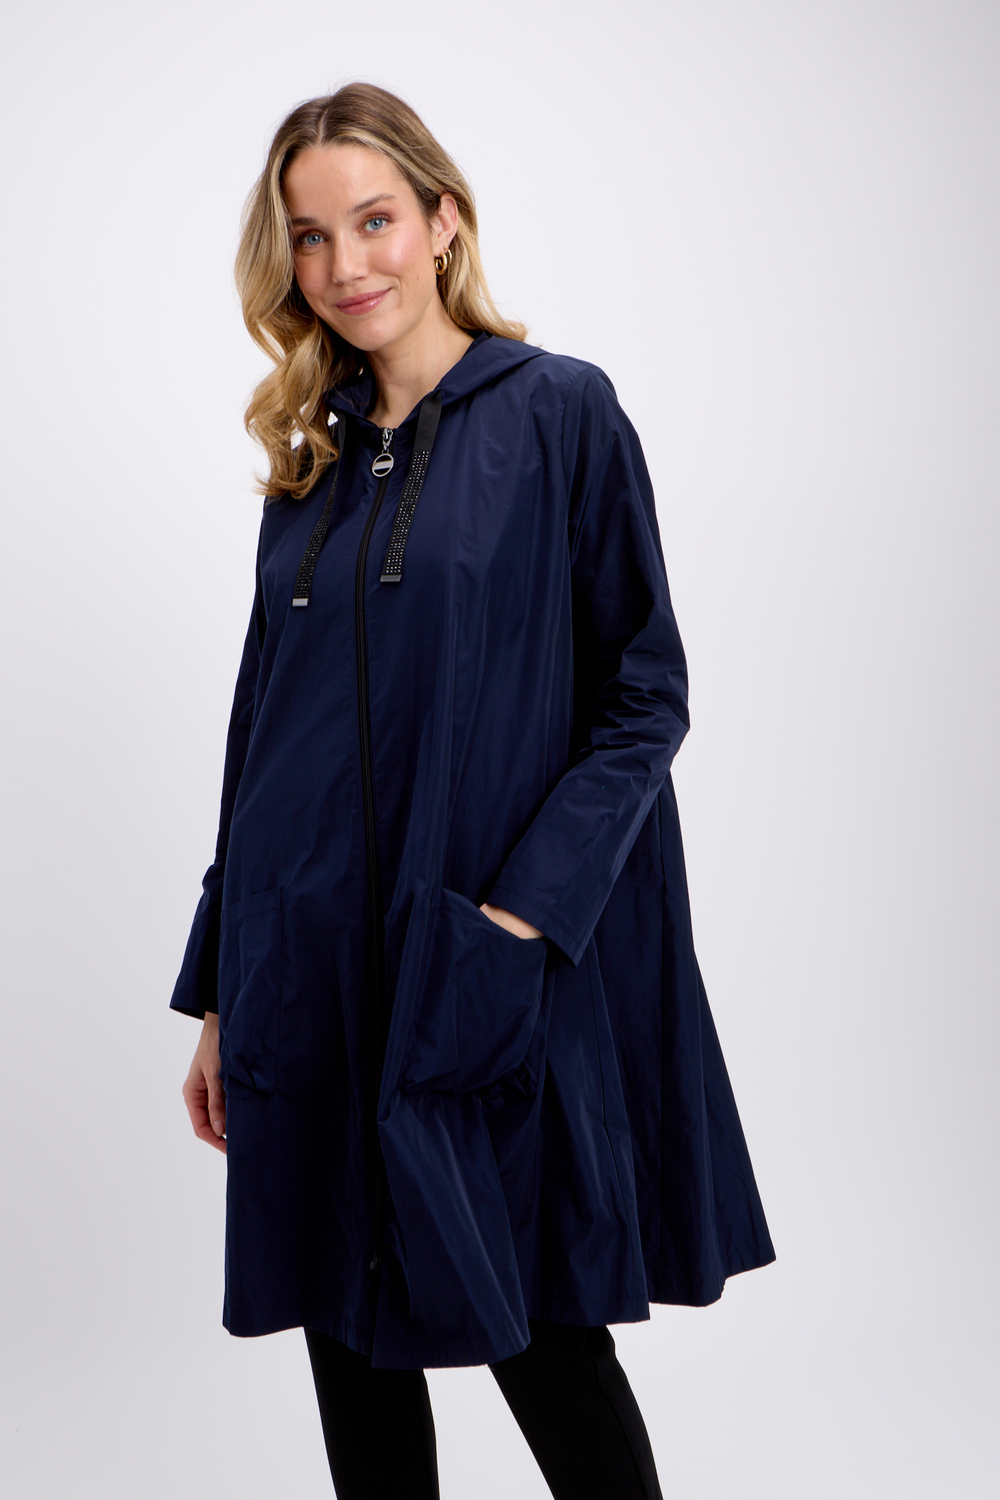 Zip Front Flared Coat Style 241068. Midnight Blue